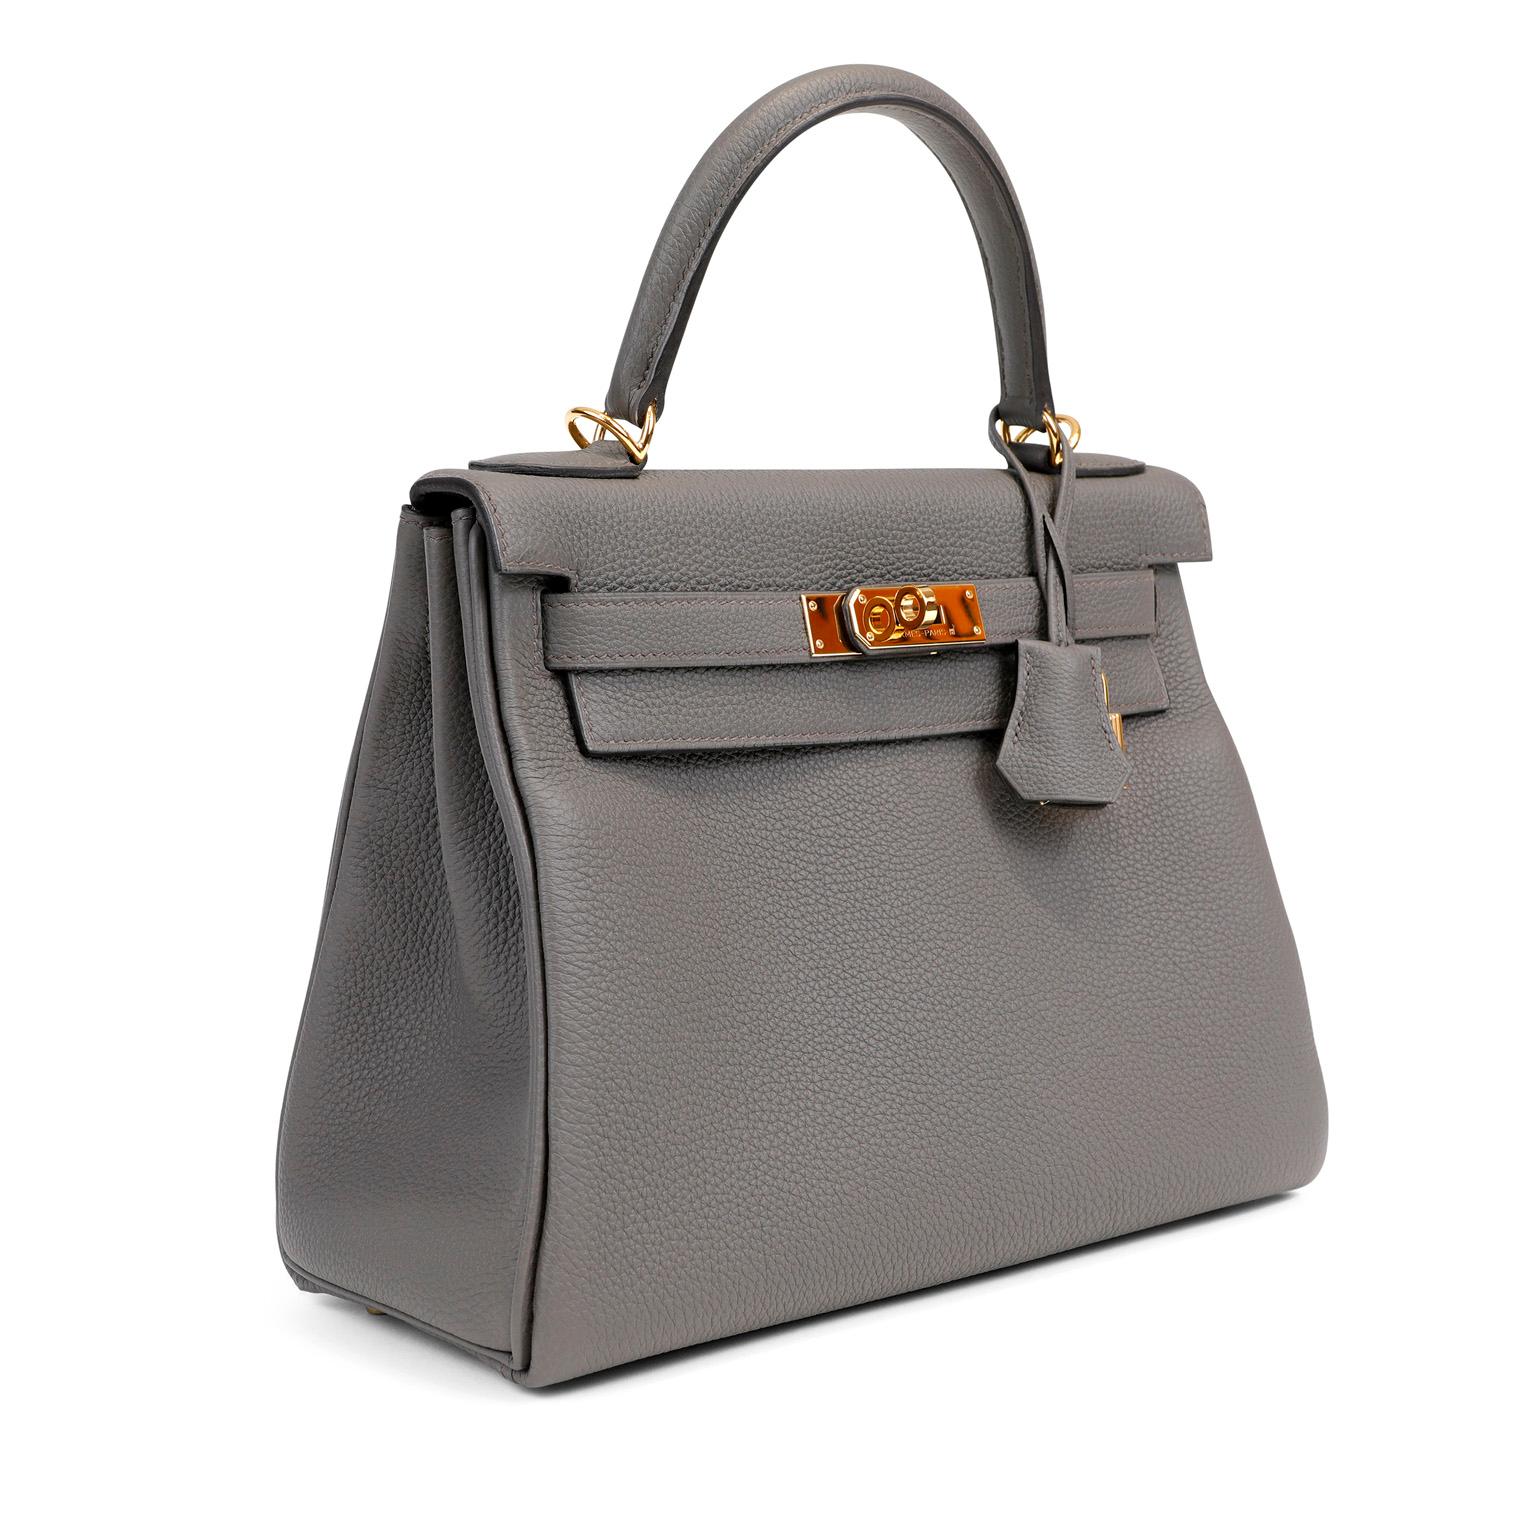 This authentic Hermès Grey Togo Leather 28 cm Kelly in pristine condition.    Hermès bags are considered the ultimate luxury item worldwide.  Each piece is handcrafted with waitlists that can exceed a year or more.  The streamlined and demure Kelly